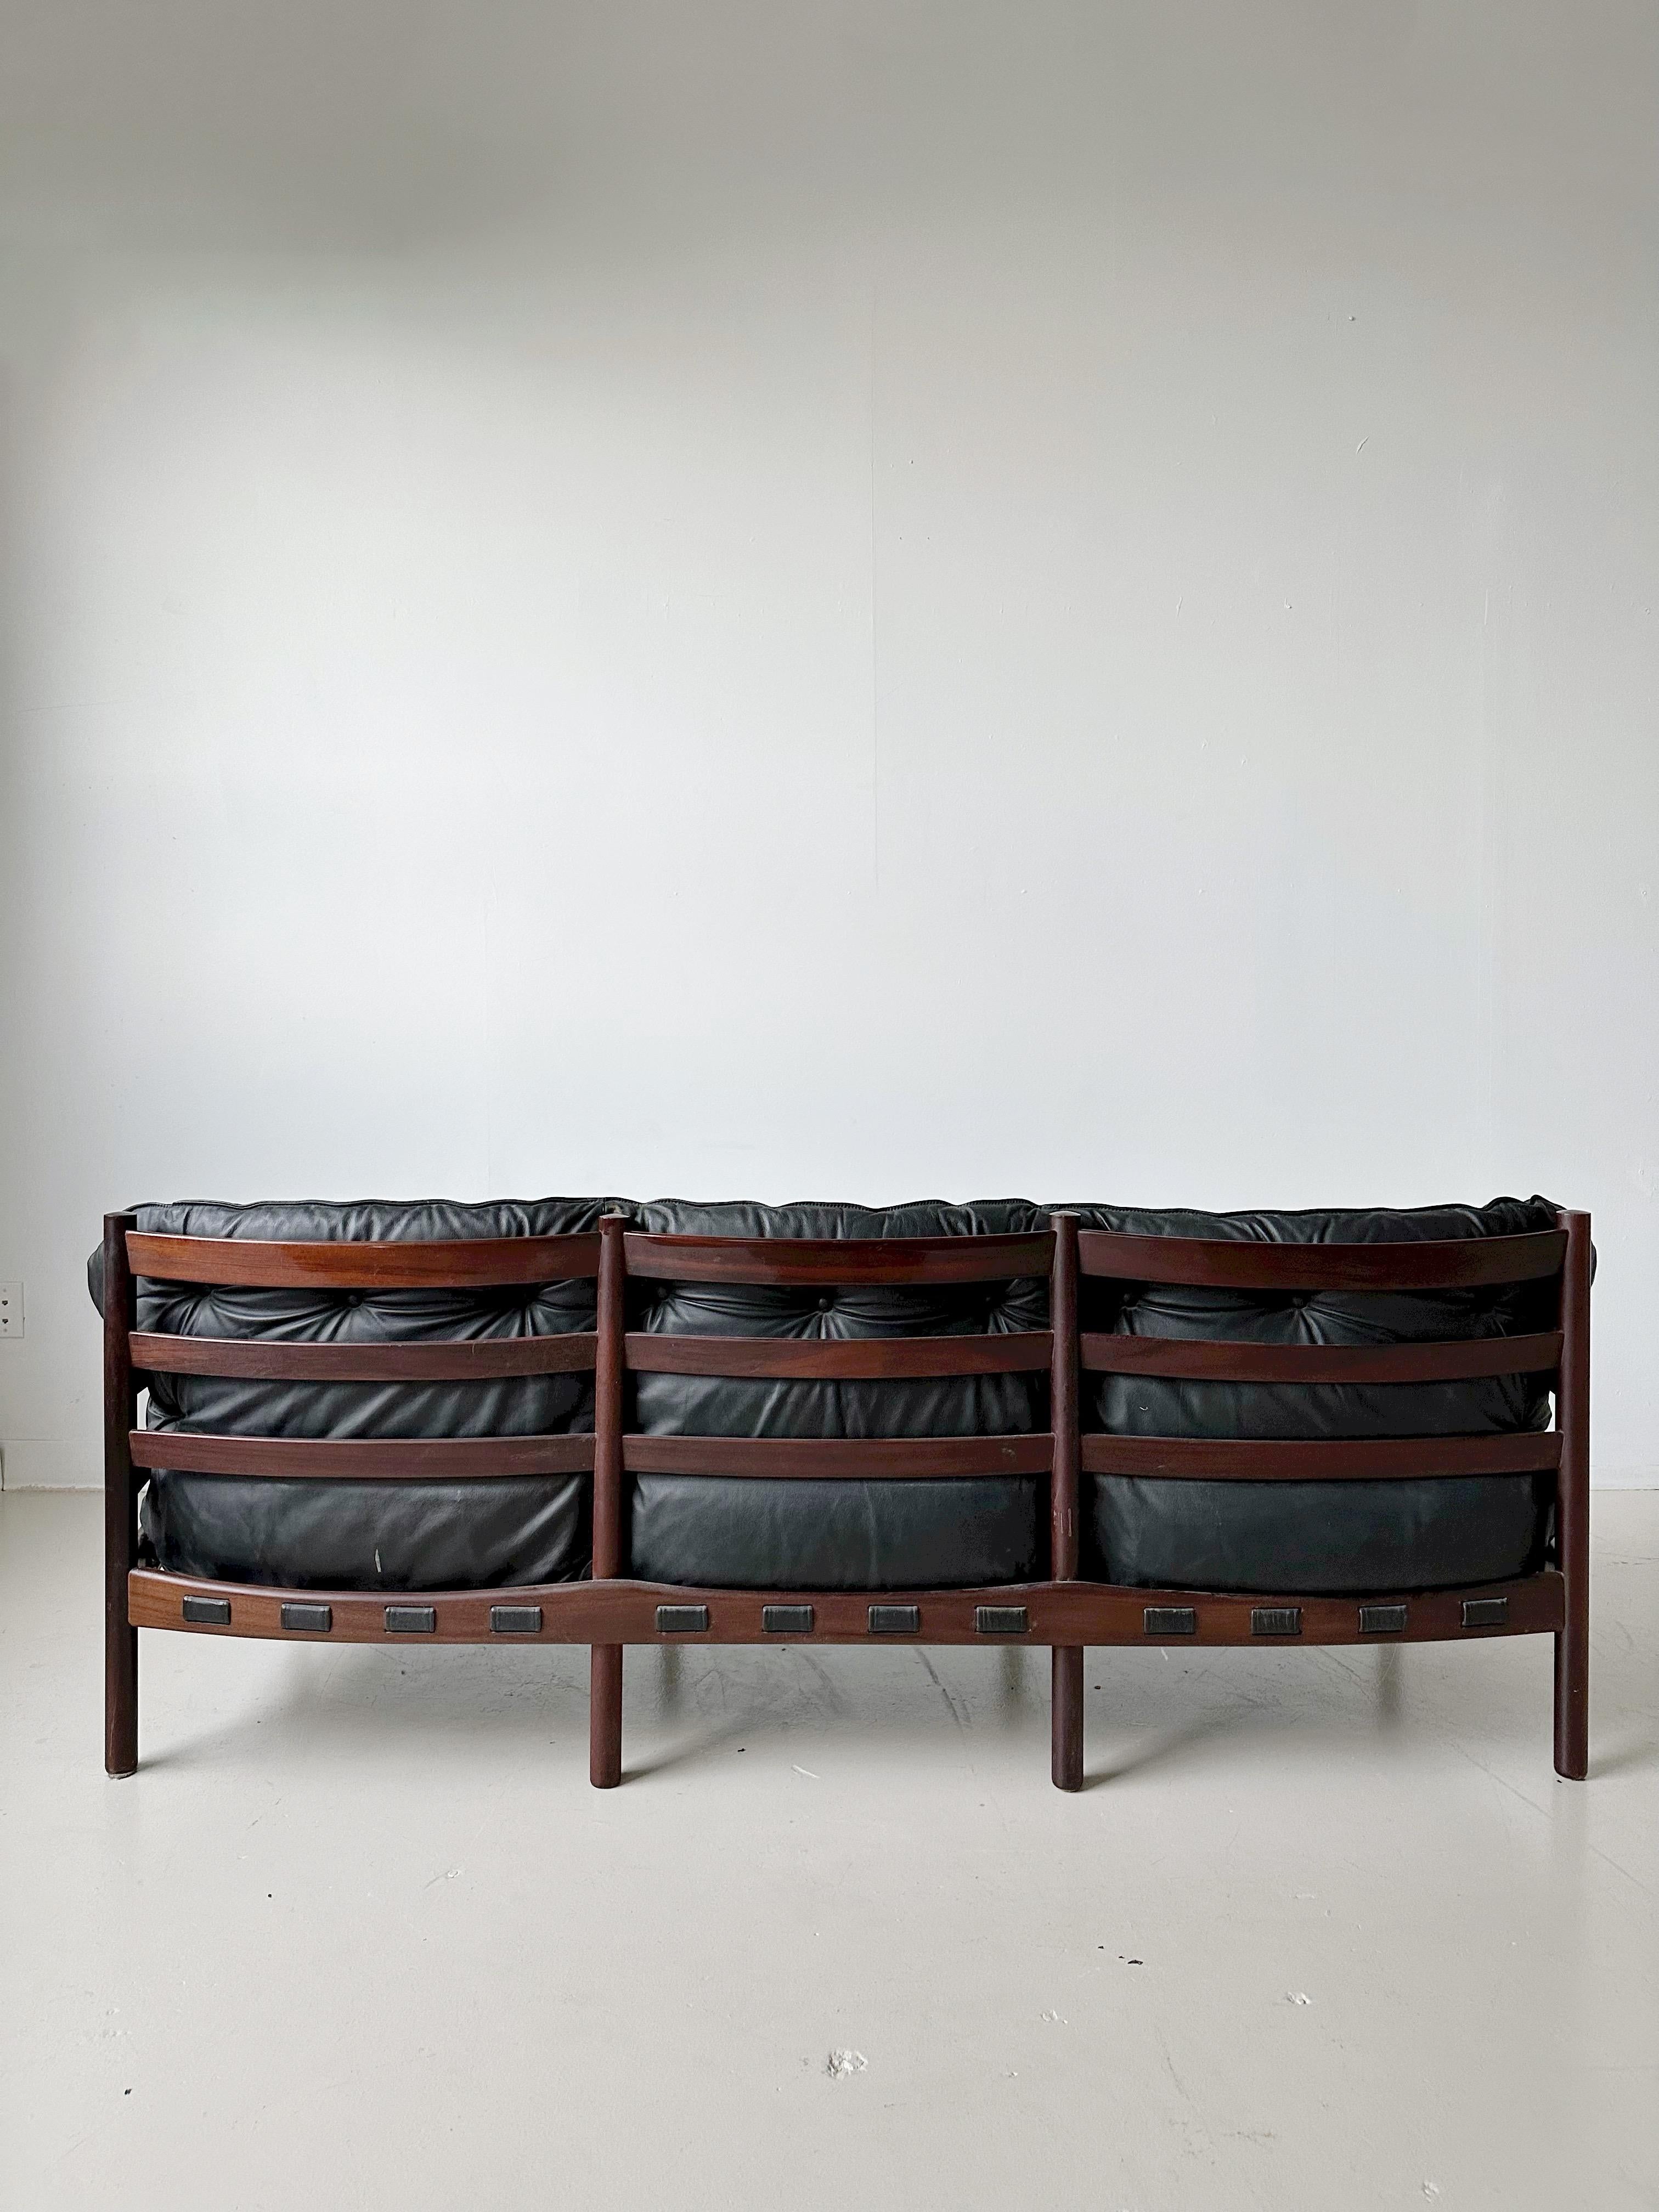 Black Leather 3 Seater Sofa with Wooden (Walnut or Rosewood) Frame by Sven Ellekaer for Coja, 60s

//

Dimensions:
80”W x 28”D x 28”H

68” seat width x 24” seat depth x 16” seat height

//

*Very good condition, minor patina on leather,